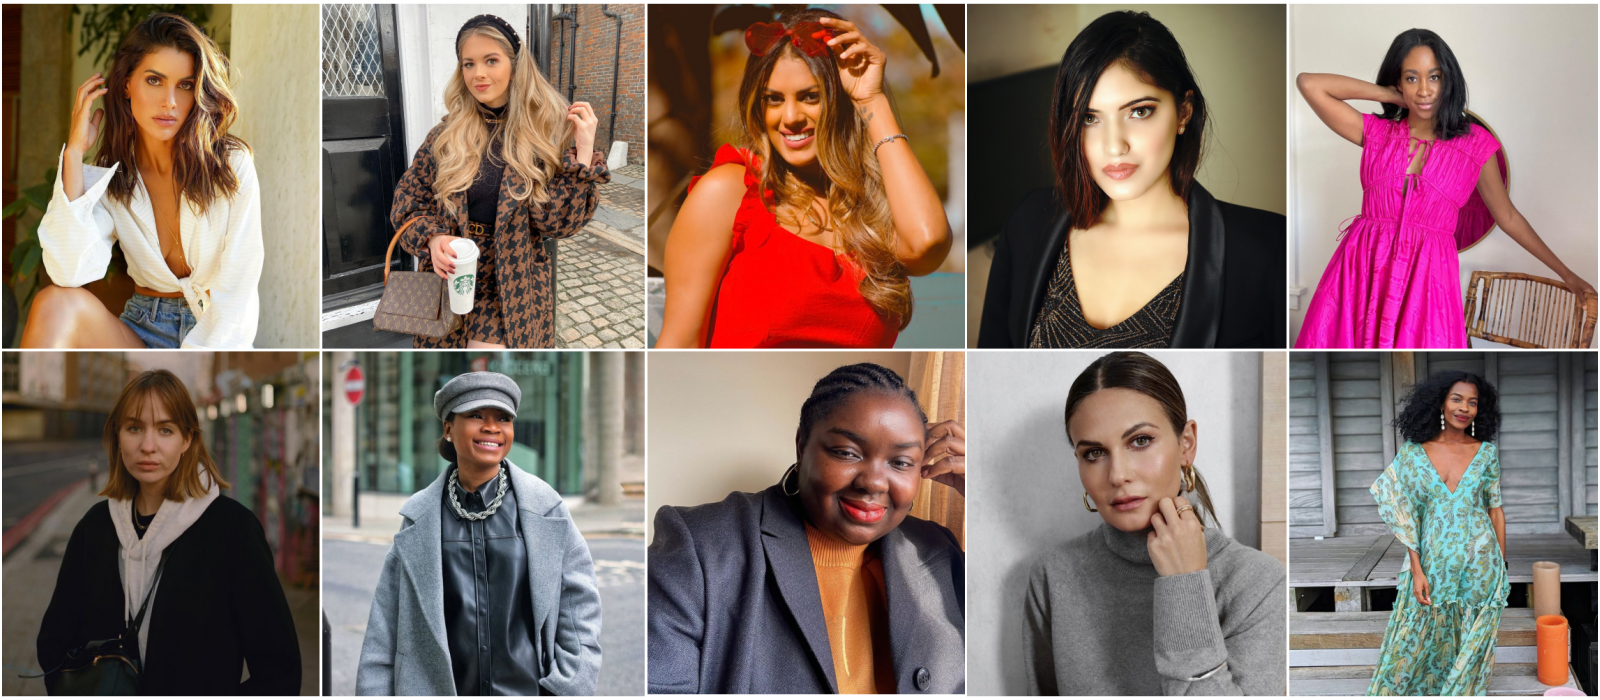 Top 10 most influential fashion blogs